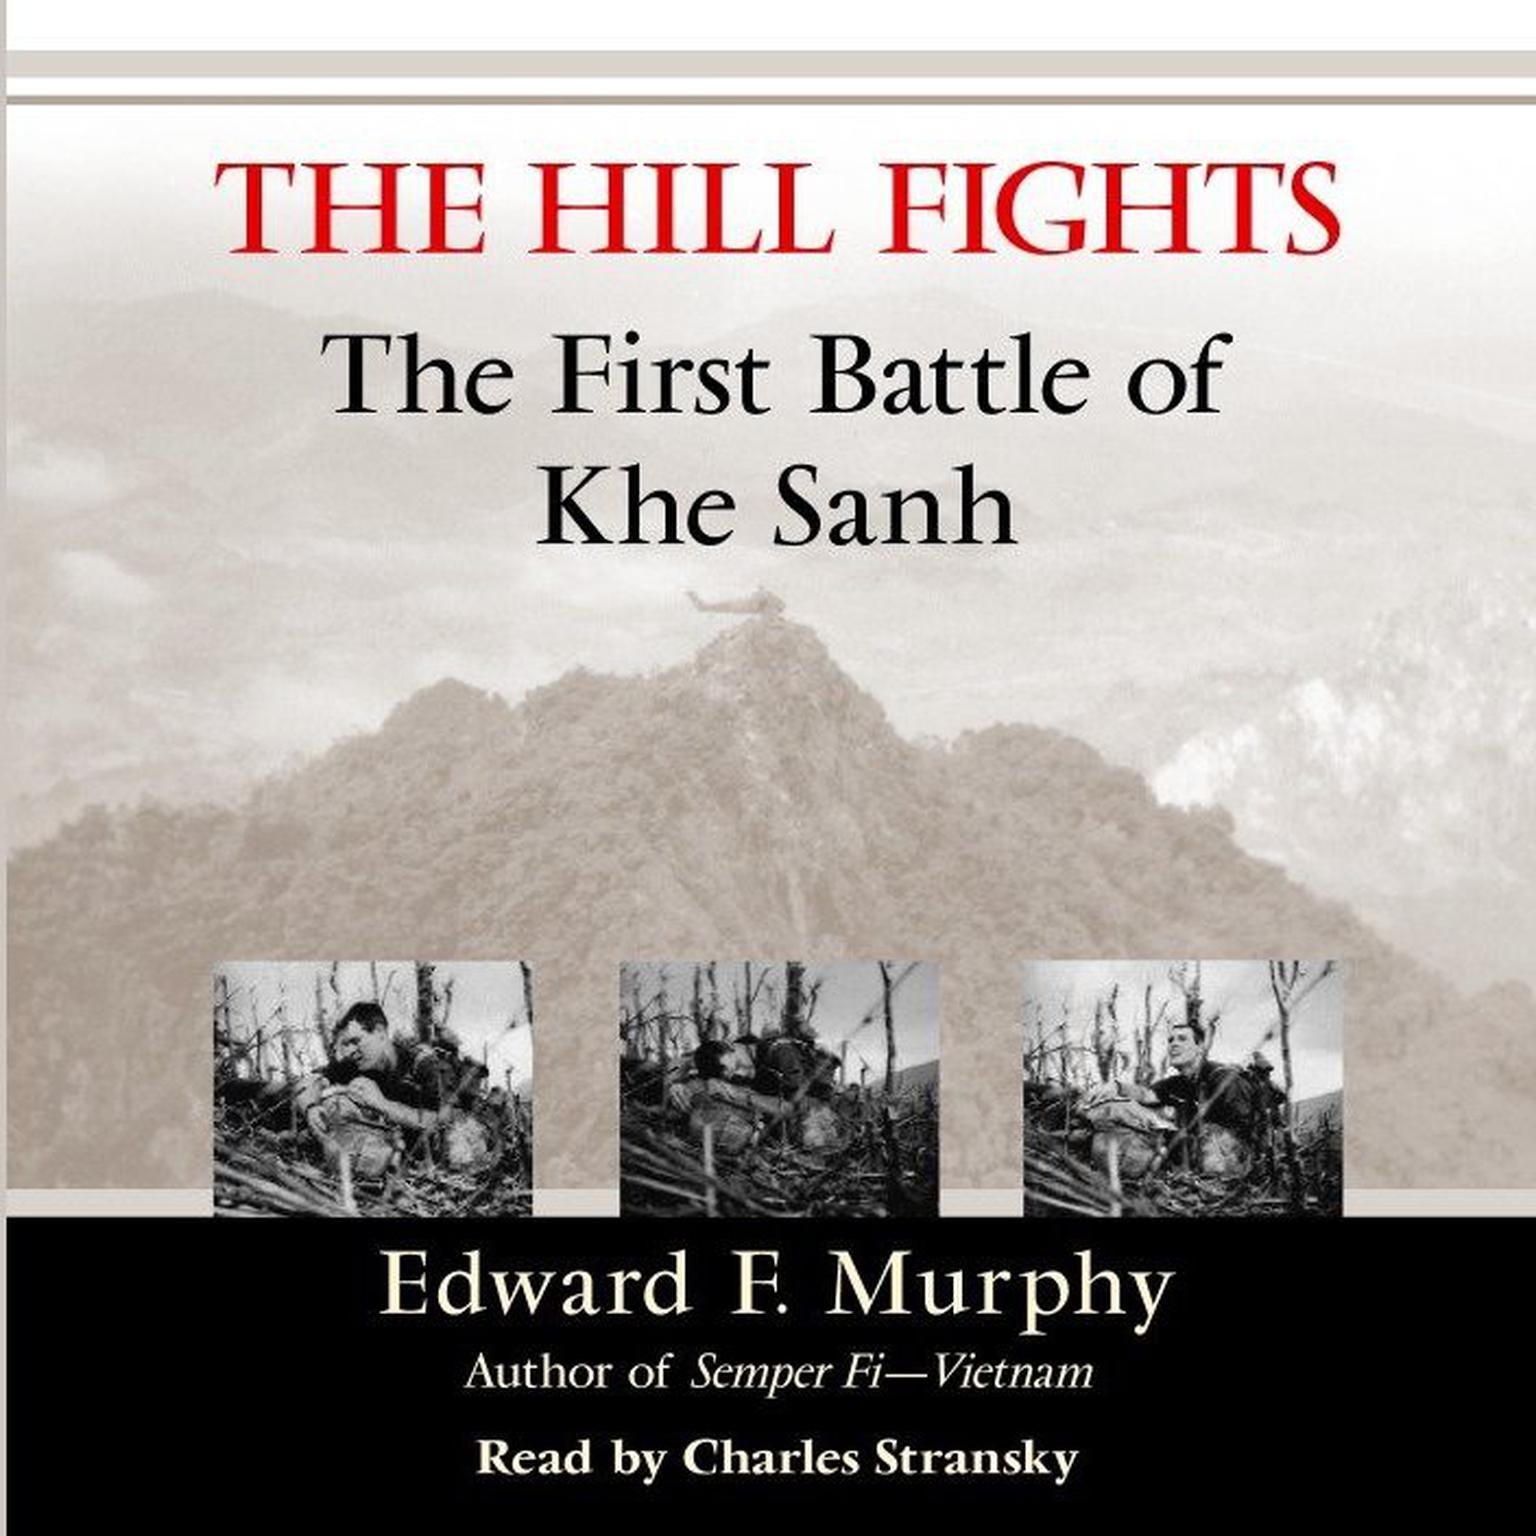 The Hill Fights (Abridged): The First Battle of Khe Sanh Audiobook, by Edward F. Murphy